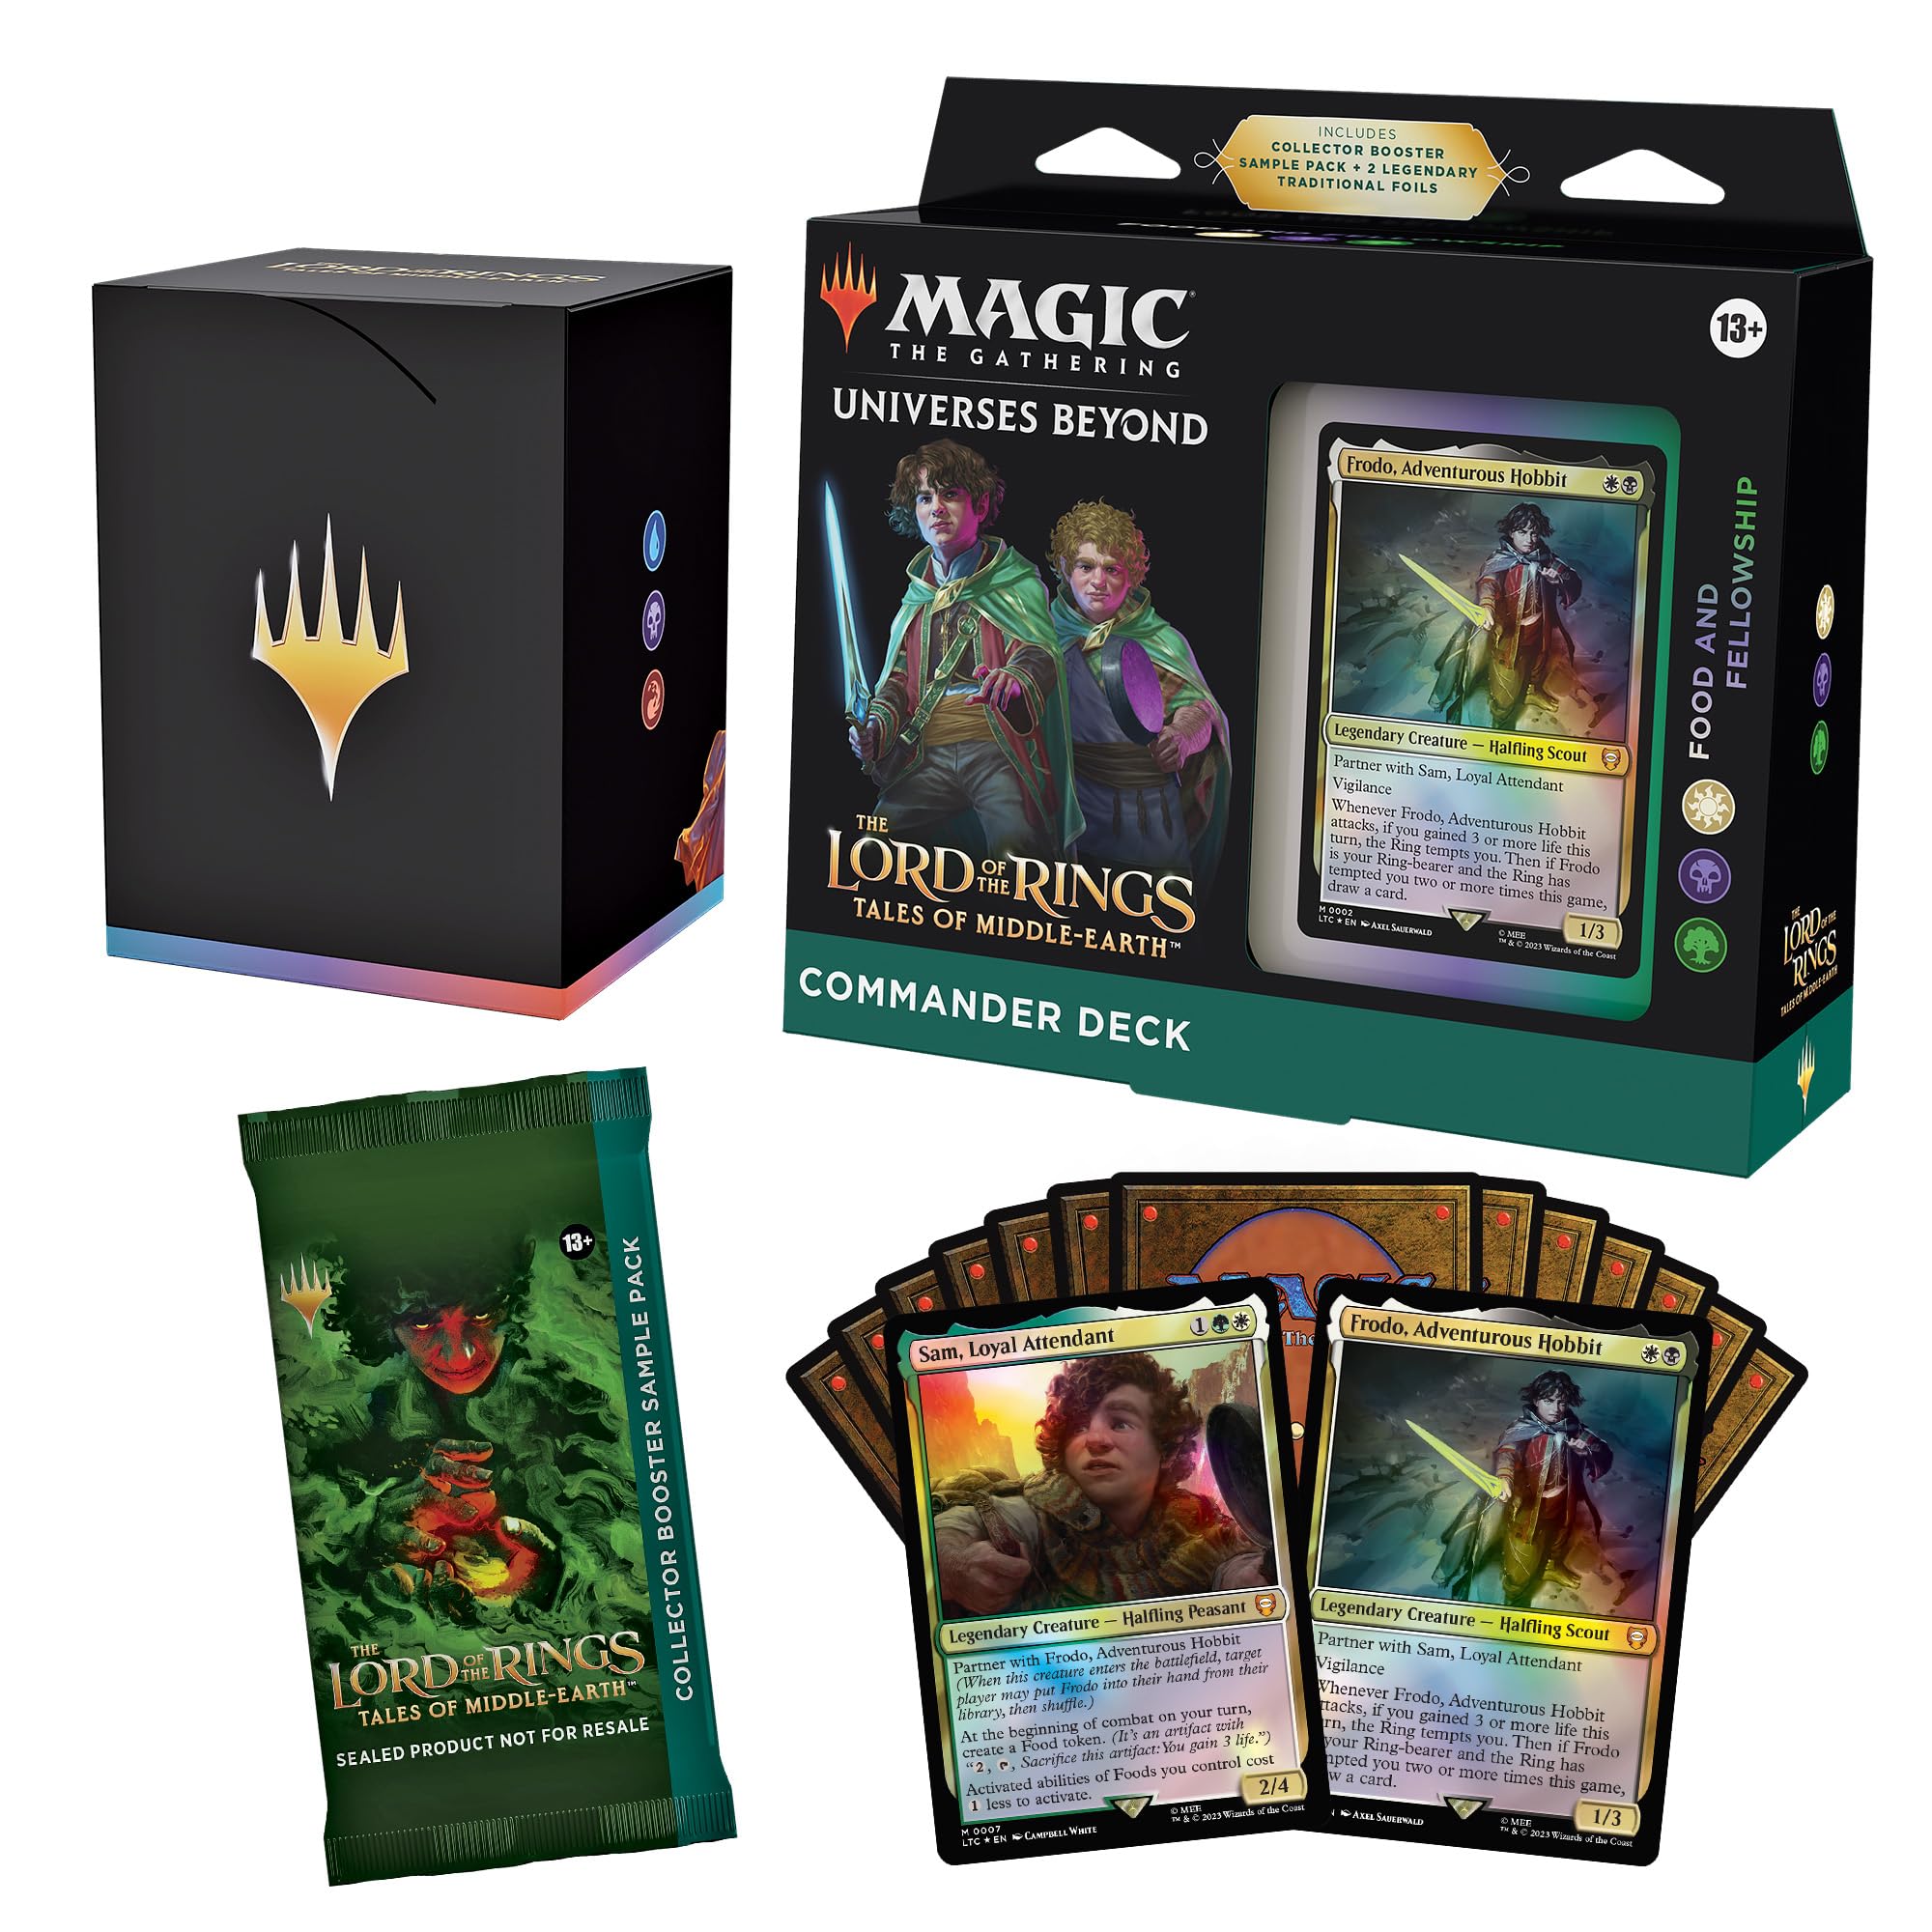 Magic The Gathering The Lord of The Rings: Tales of Middle-Earth Commander Deck Bundle – Includes Pack of 4 Decks